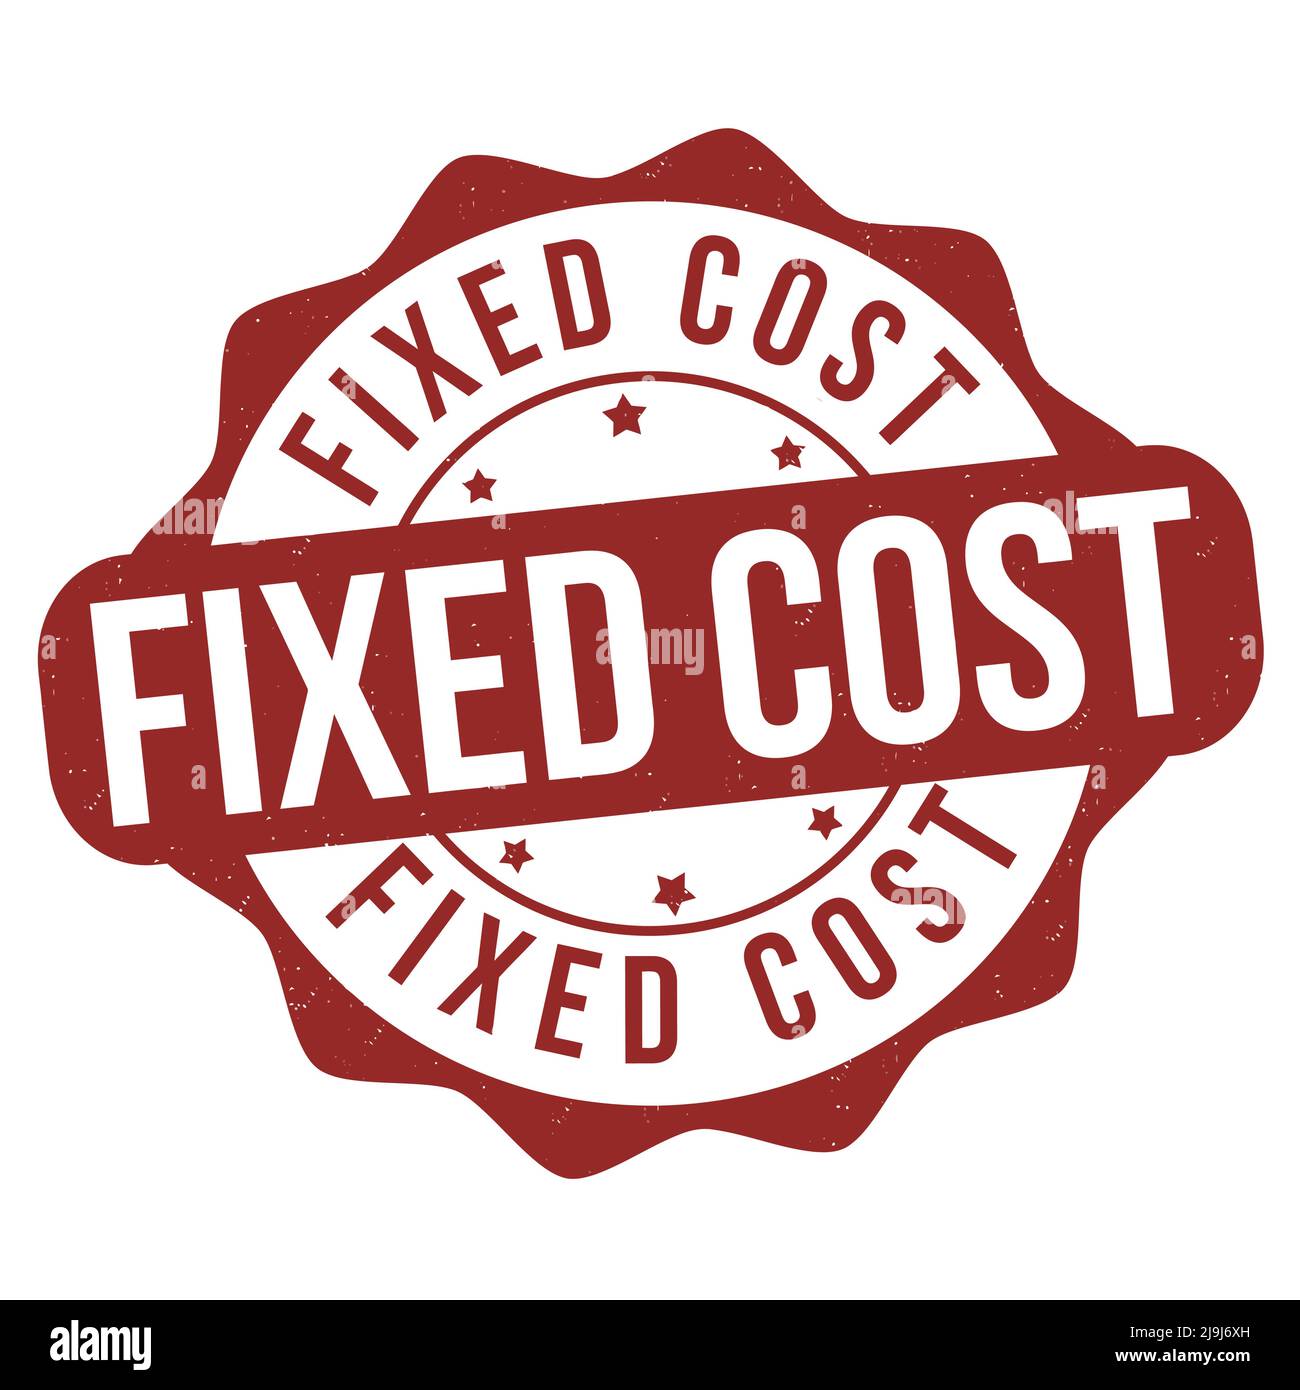 Fixed costs. Штамп фиксированный. Штамп фиксированной. Fix costs. Фиксированно печать.